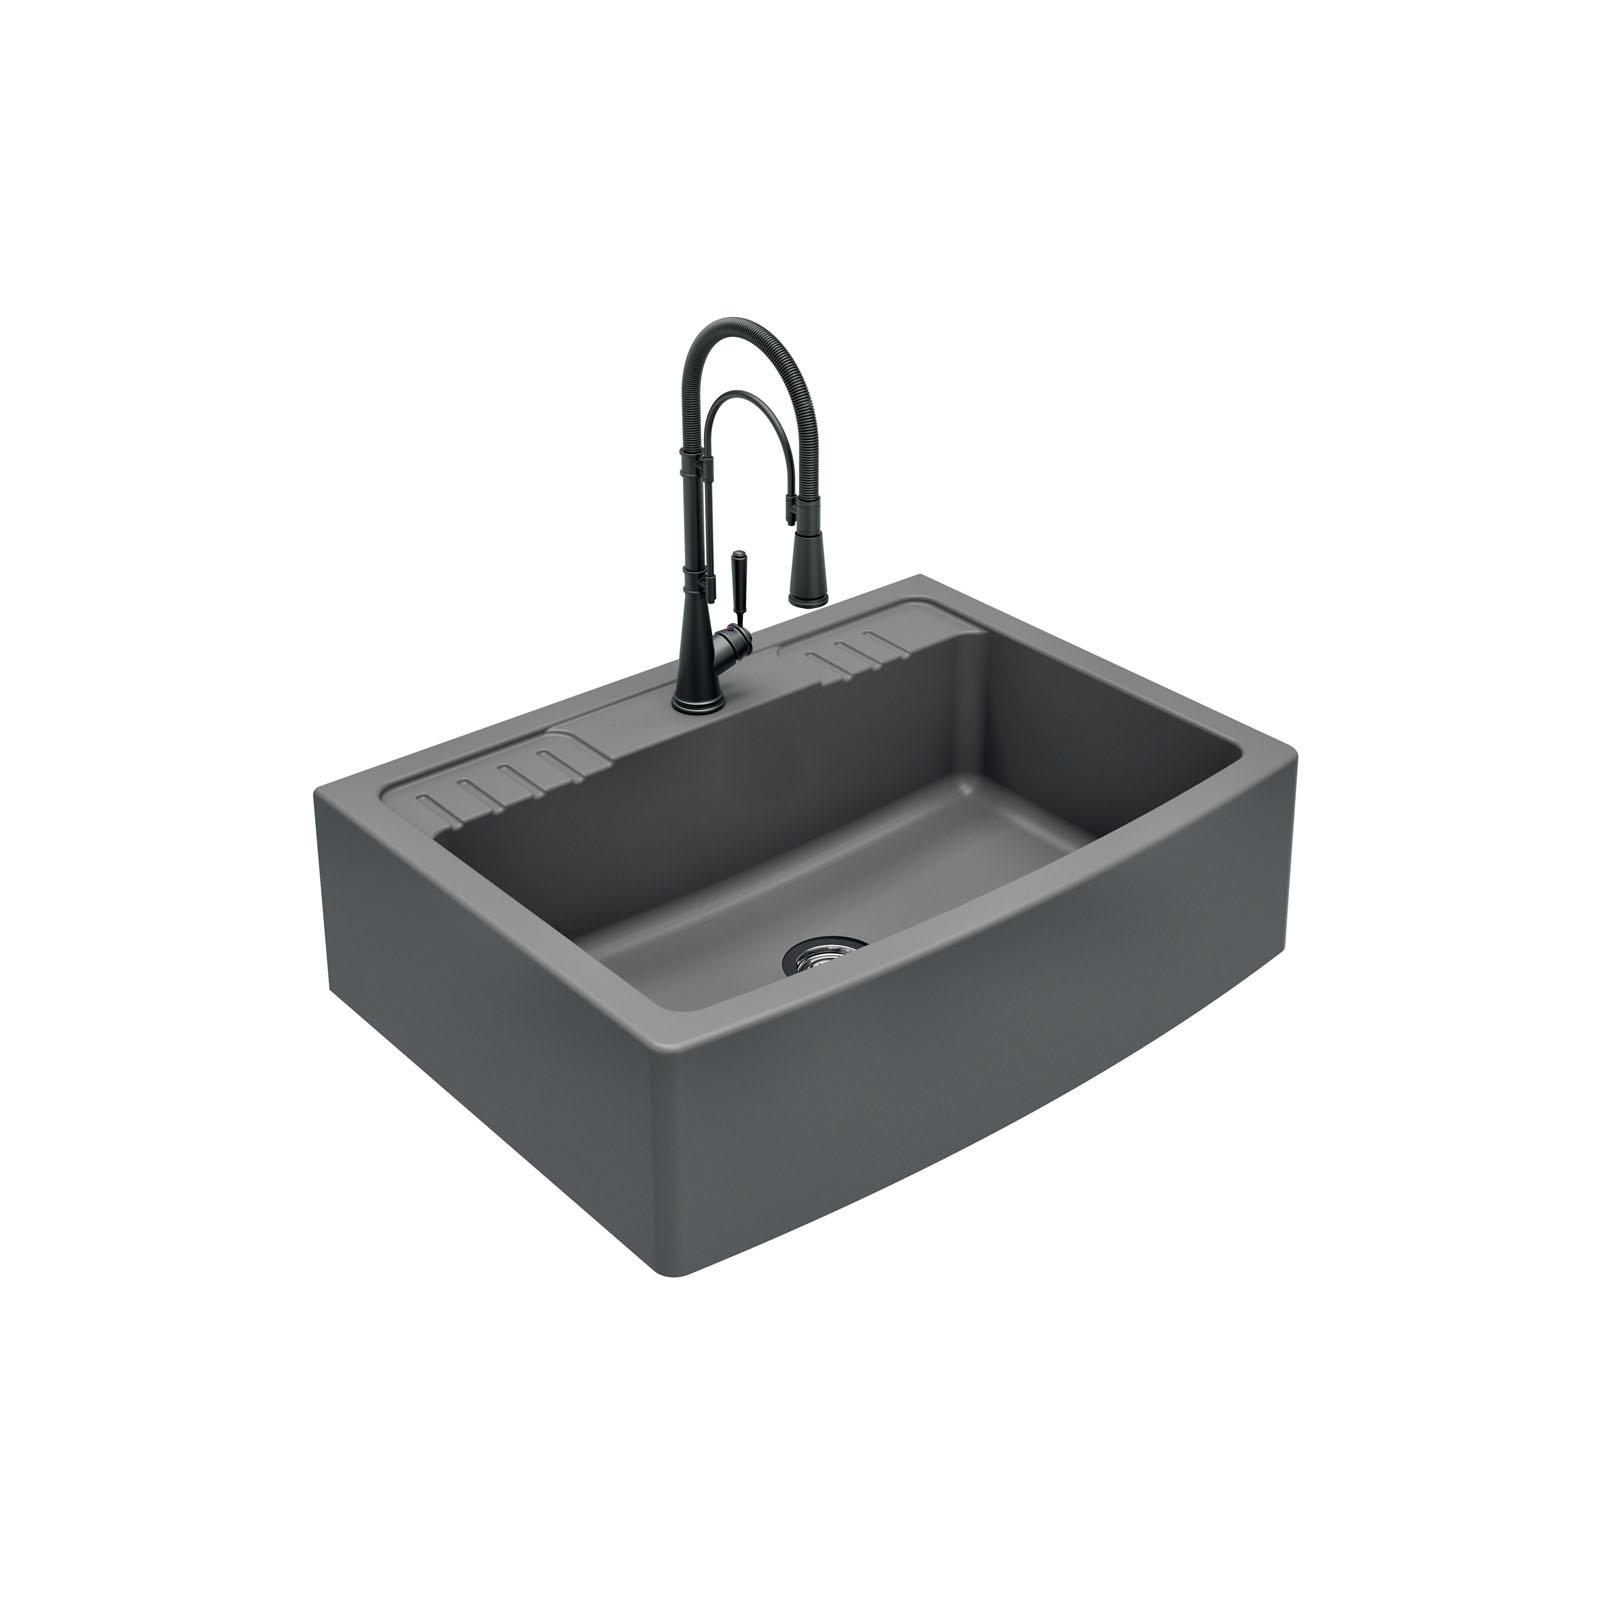 High-quality sink Clotaire IV granit titanium - one bowl - ambience 2